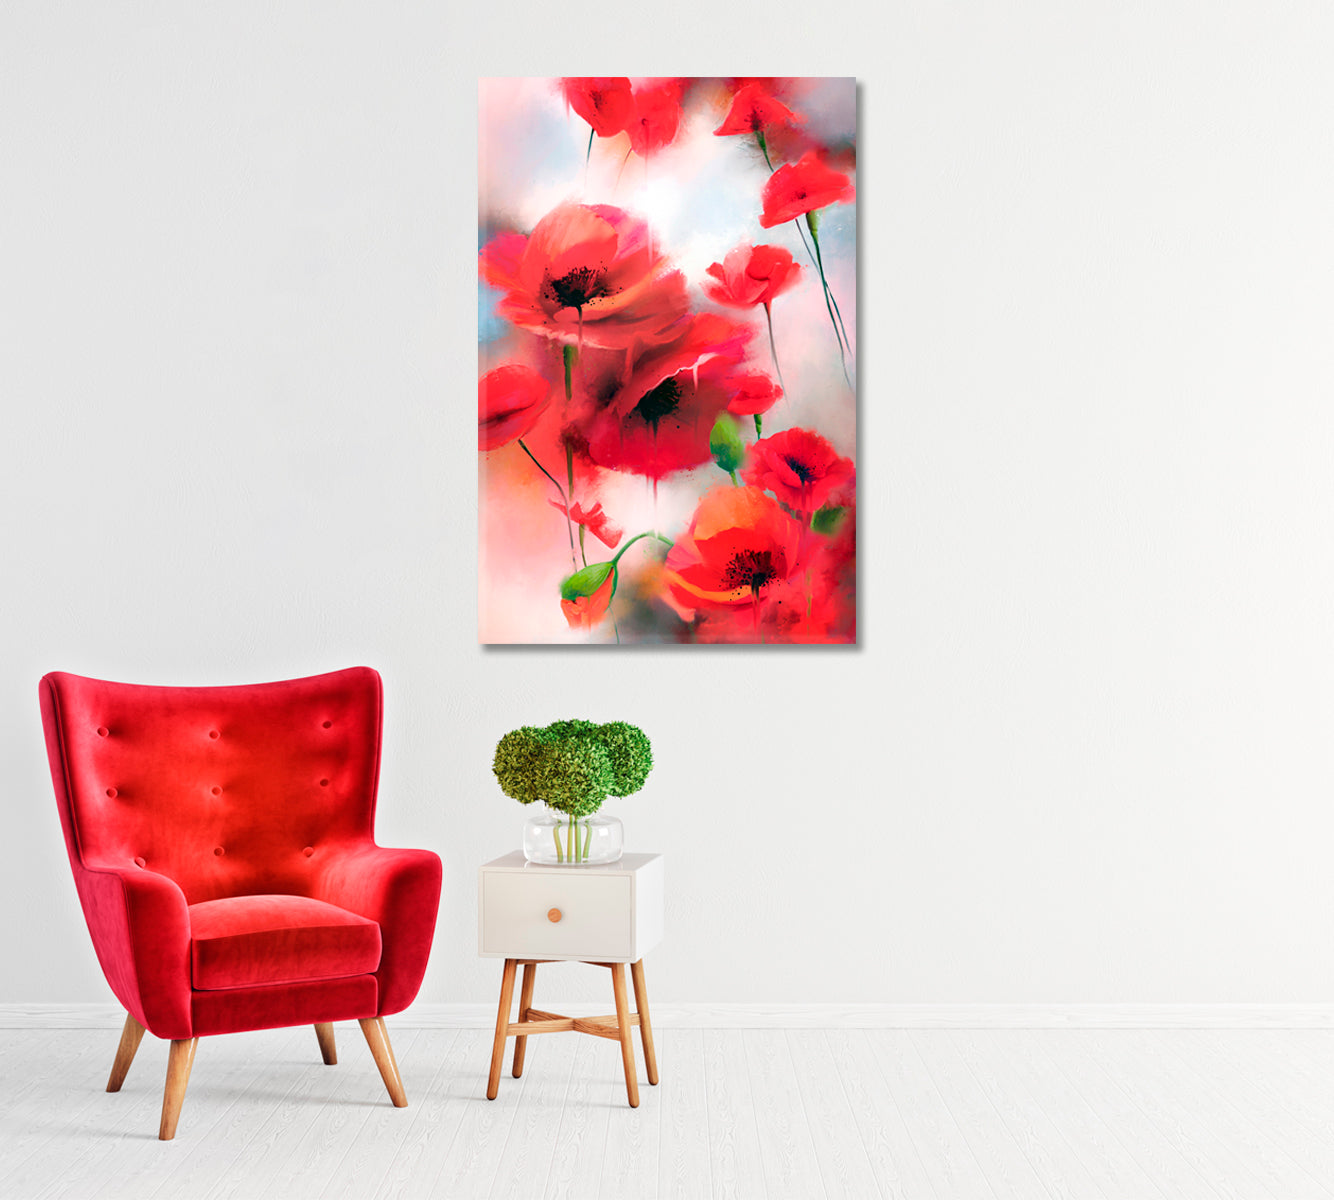 Red Poppies Abstract Canvas Print-Canvas Print-CetArt-1 panel-16x24 inches-CetArt